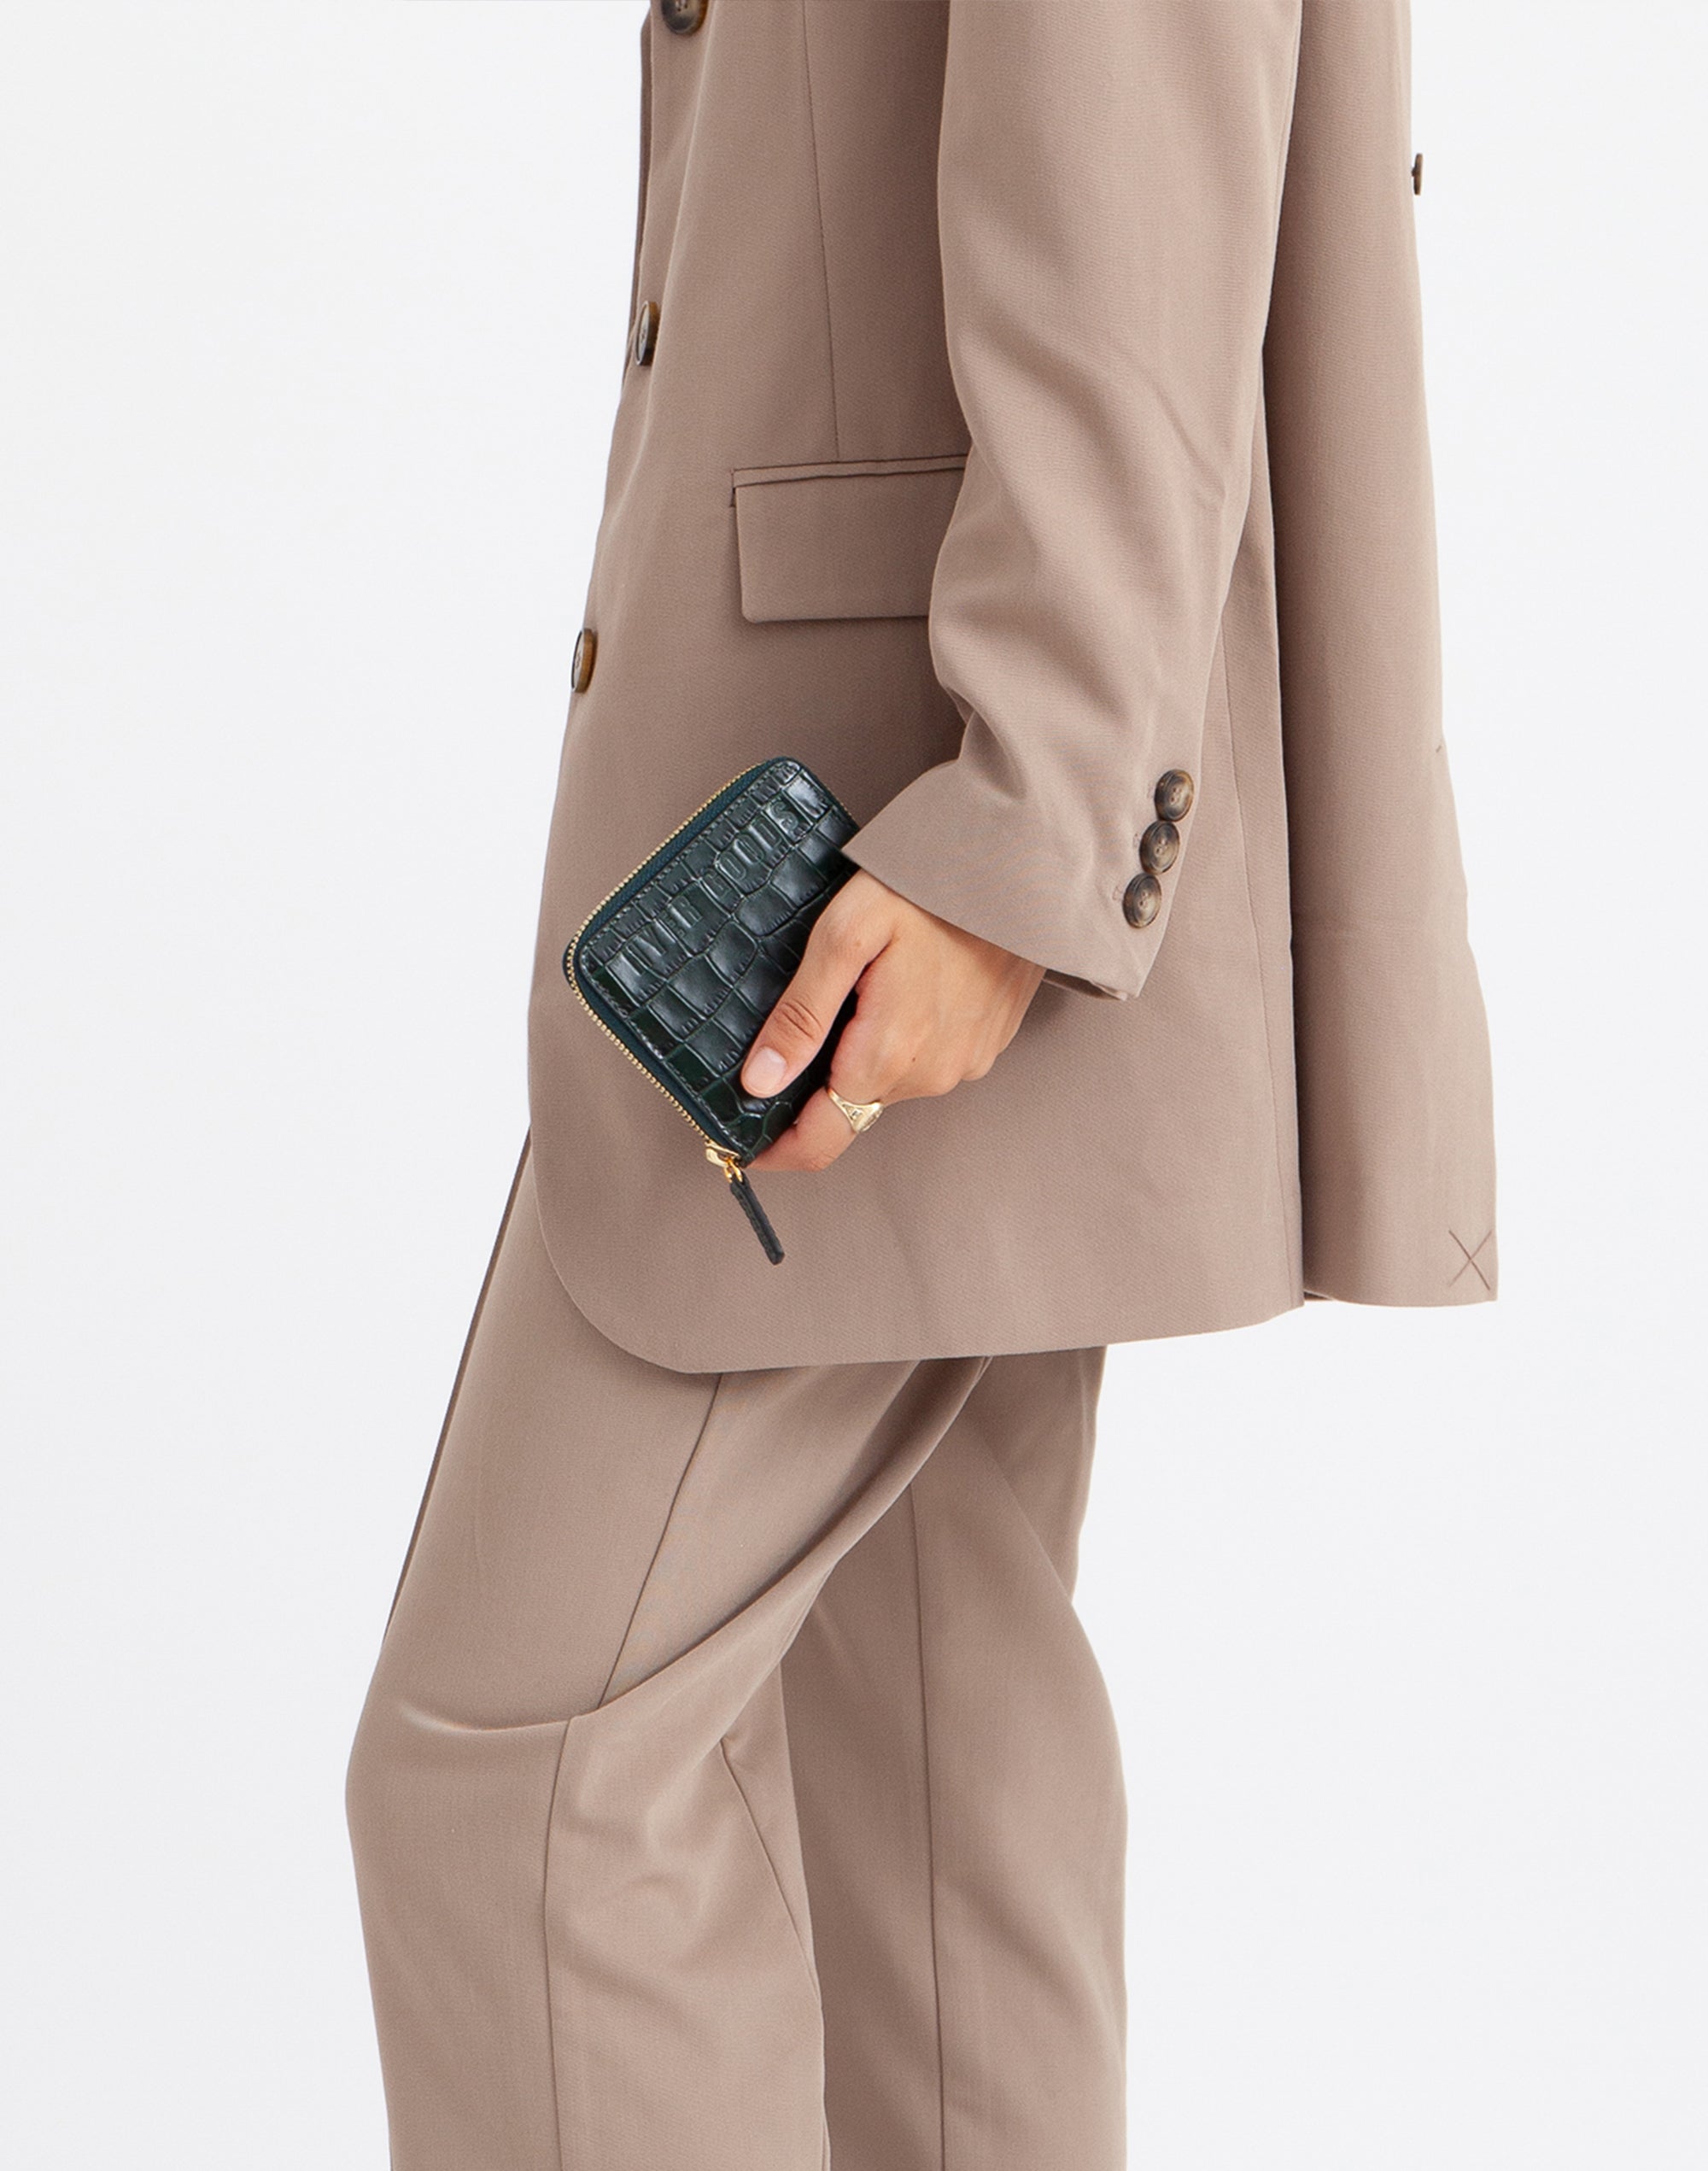 a person in a khaki suit clutches an emerald green croc zip wallet by their side